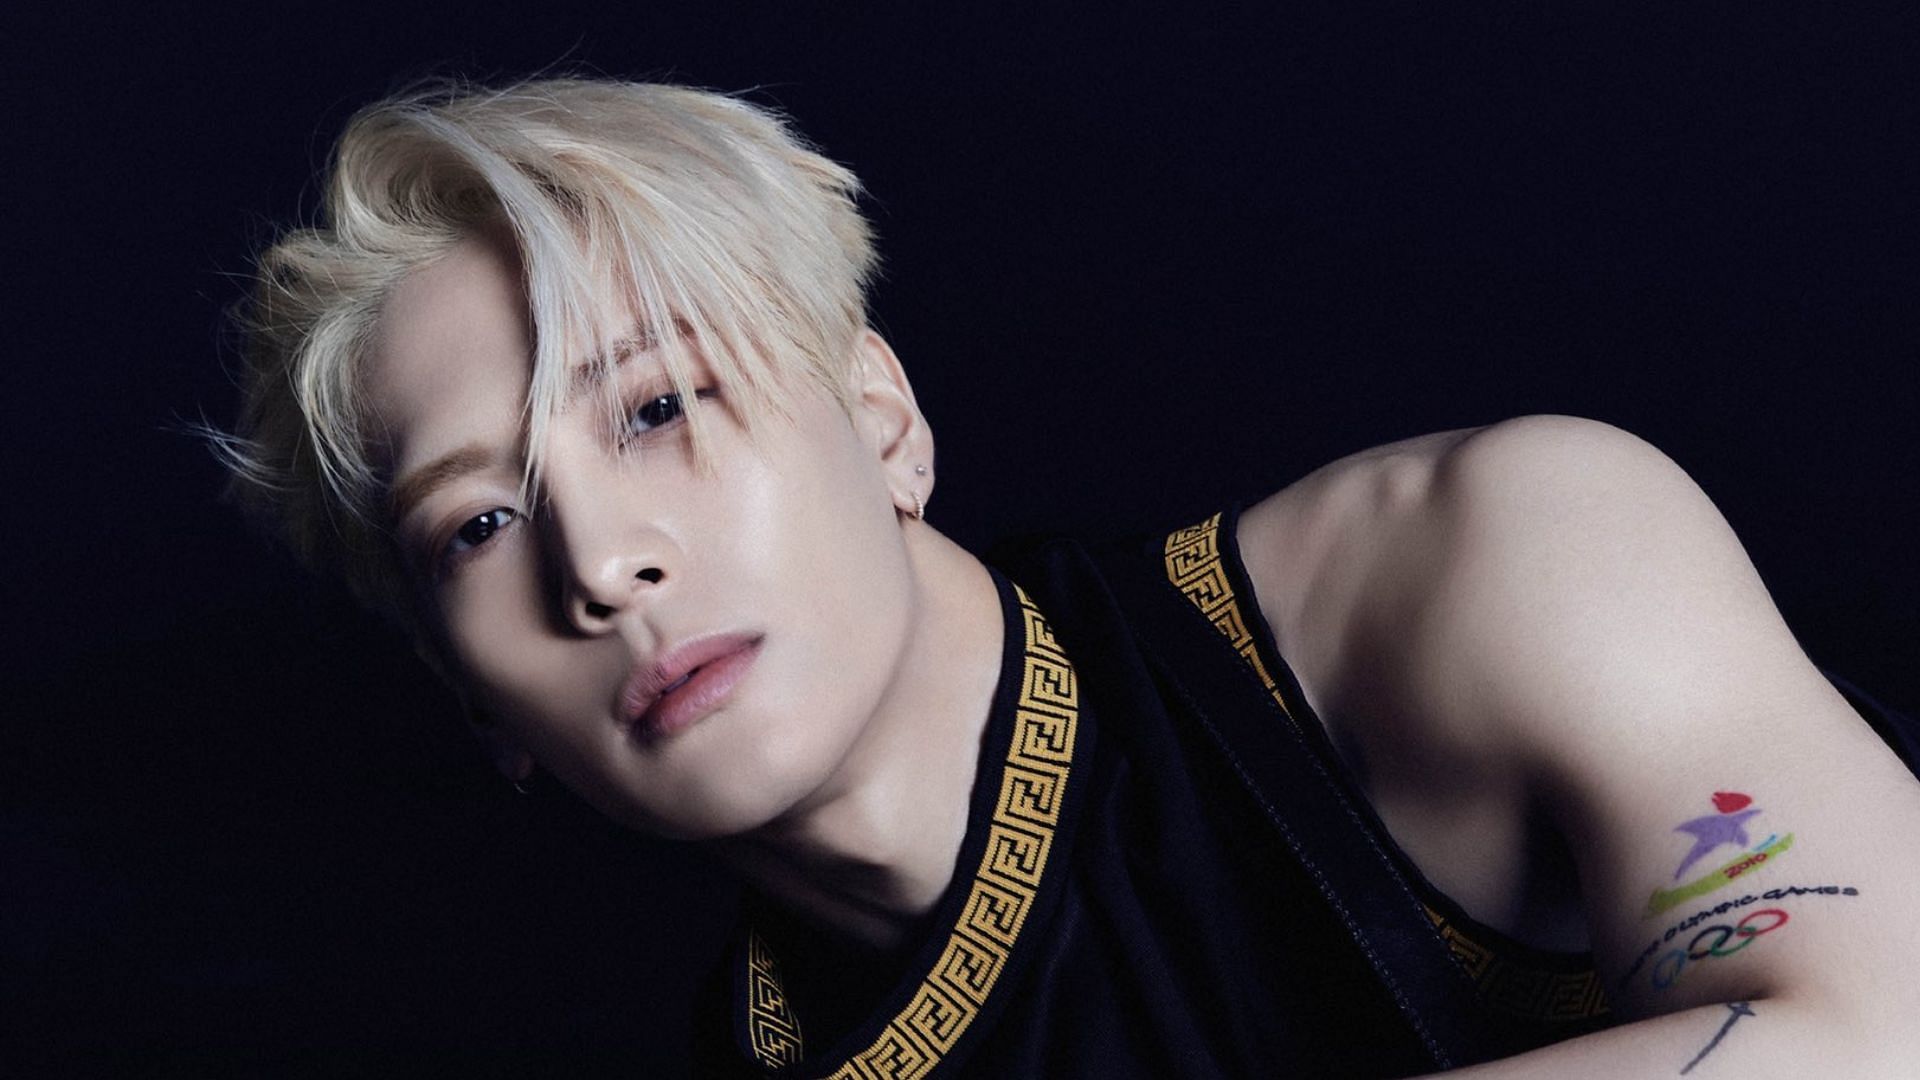 6. GOT7's Jackson's Blonde Hair Inspires Fans to Try the Look - wide 6